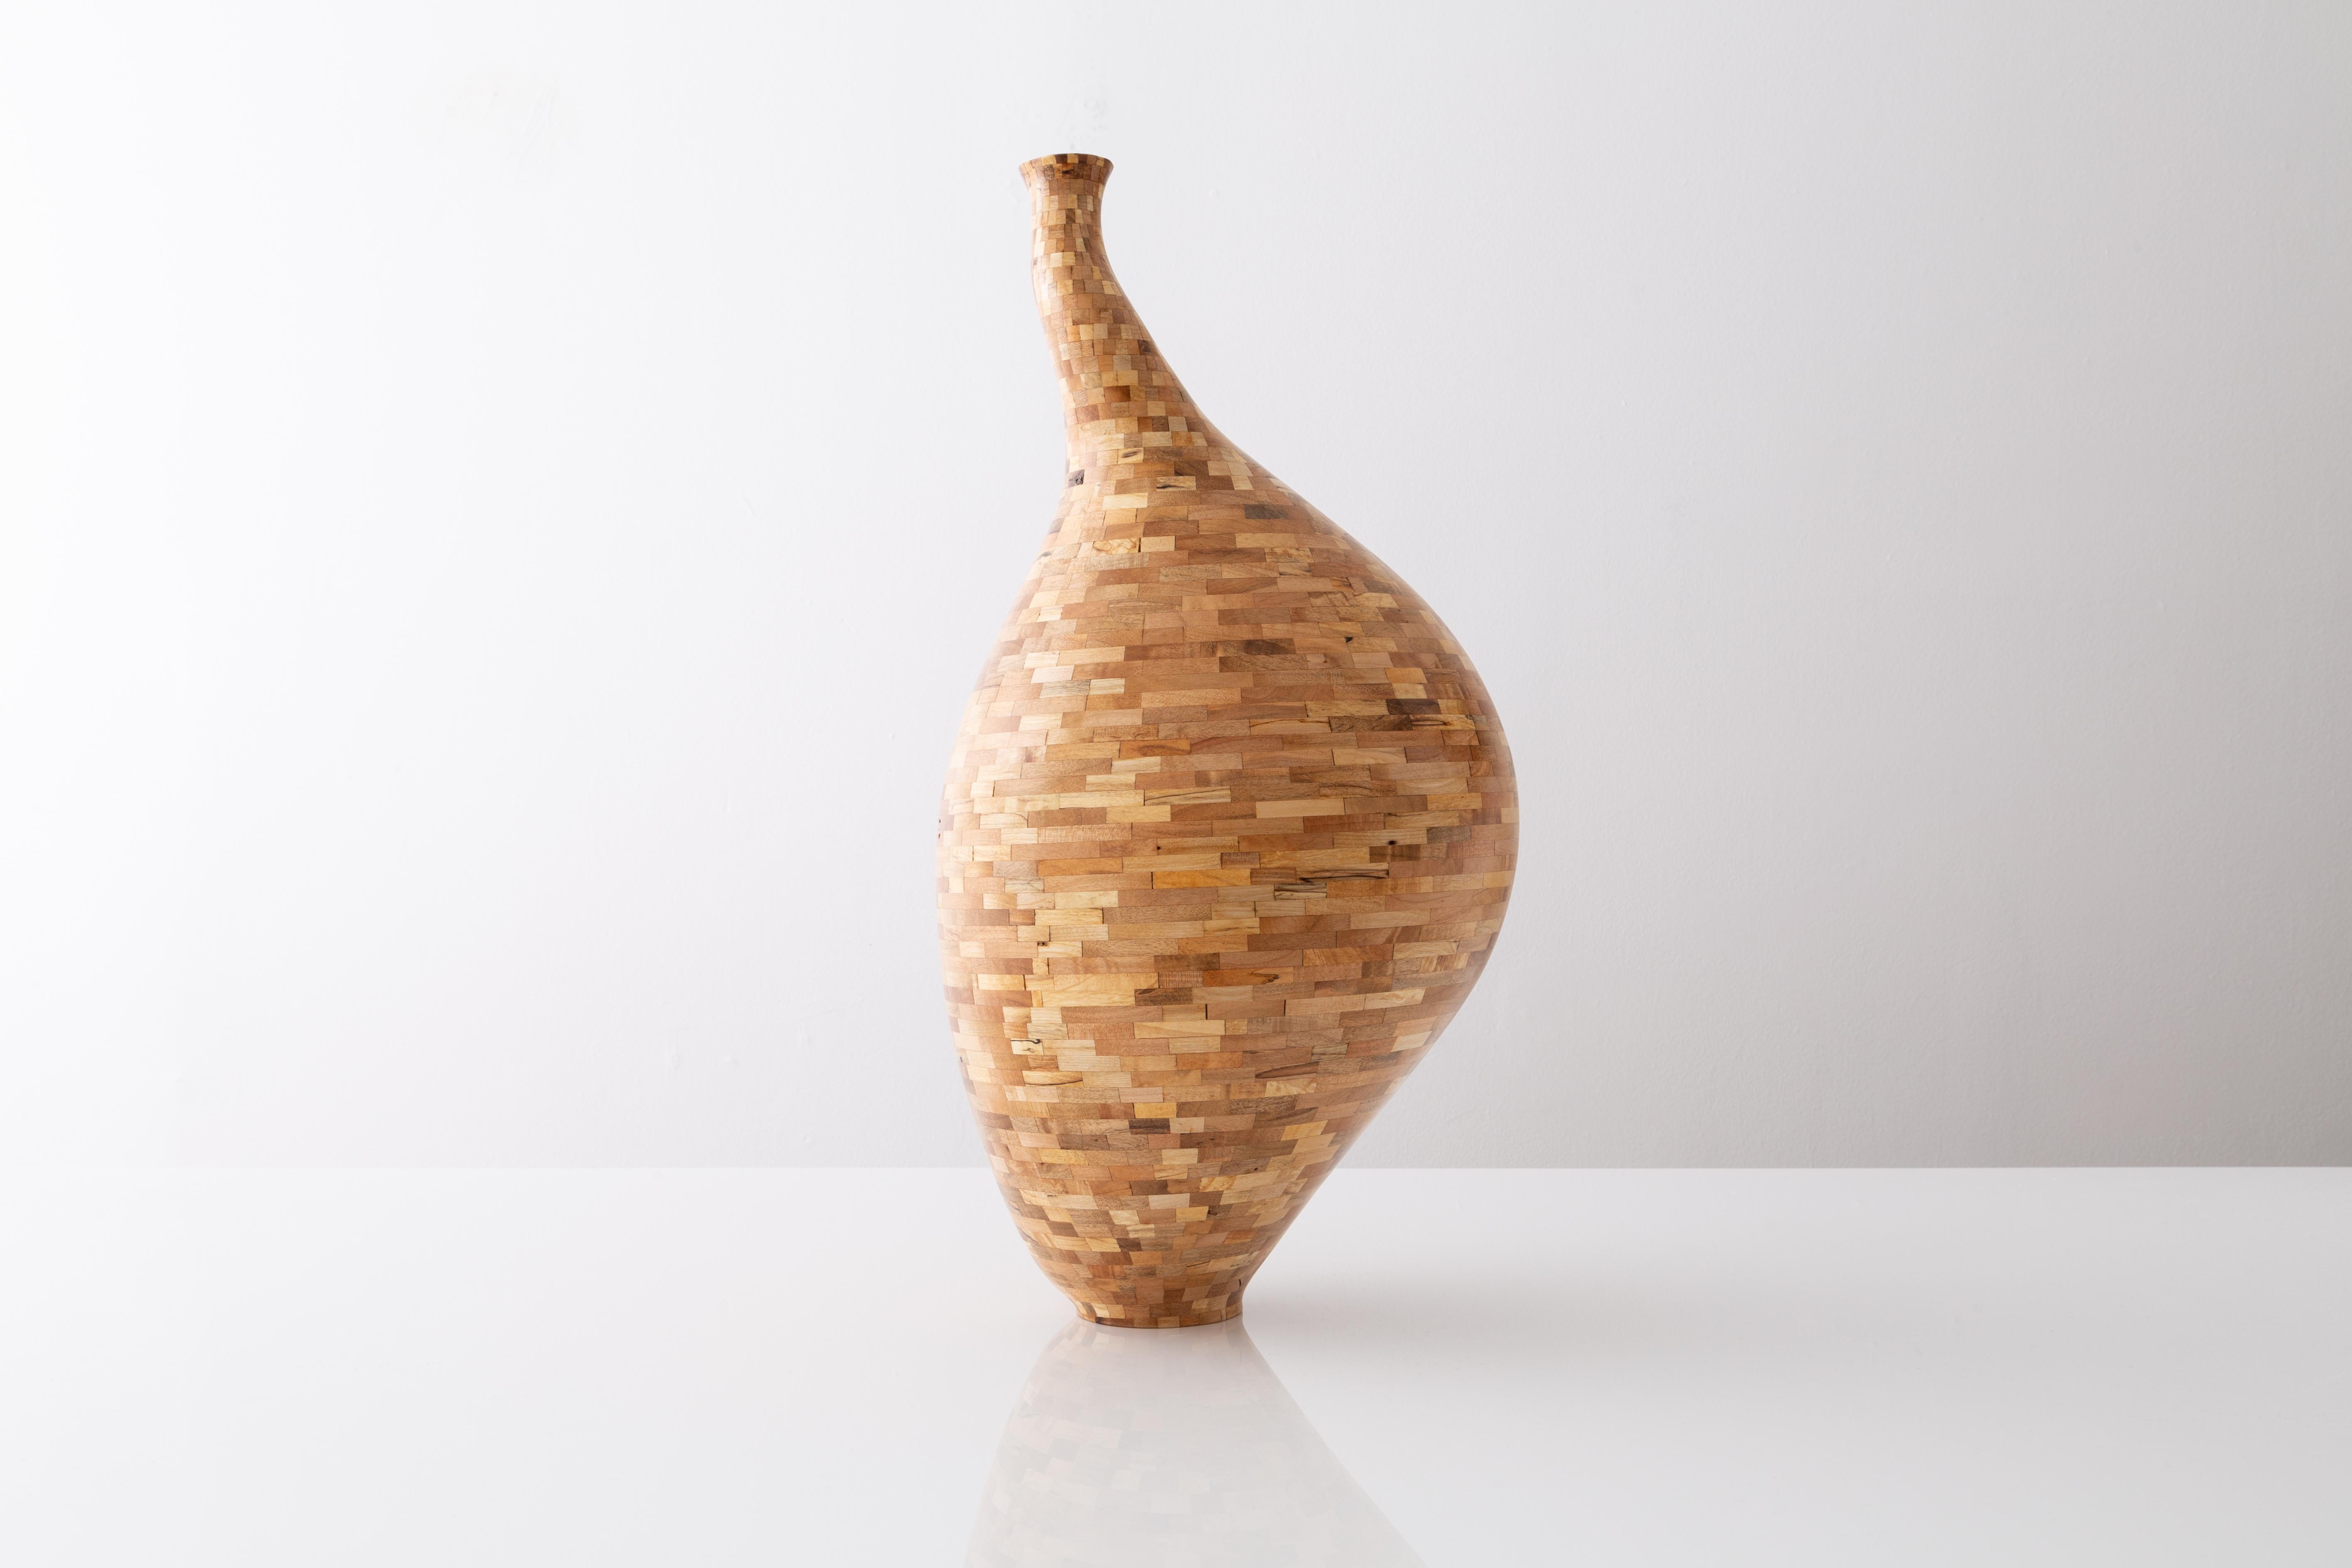 American Contemporary Spalted Maple Goose Neck Vase #1 by Richard Haining, Available Now